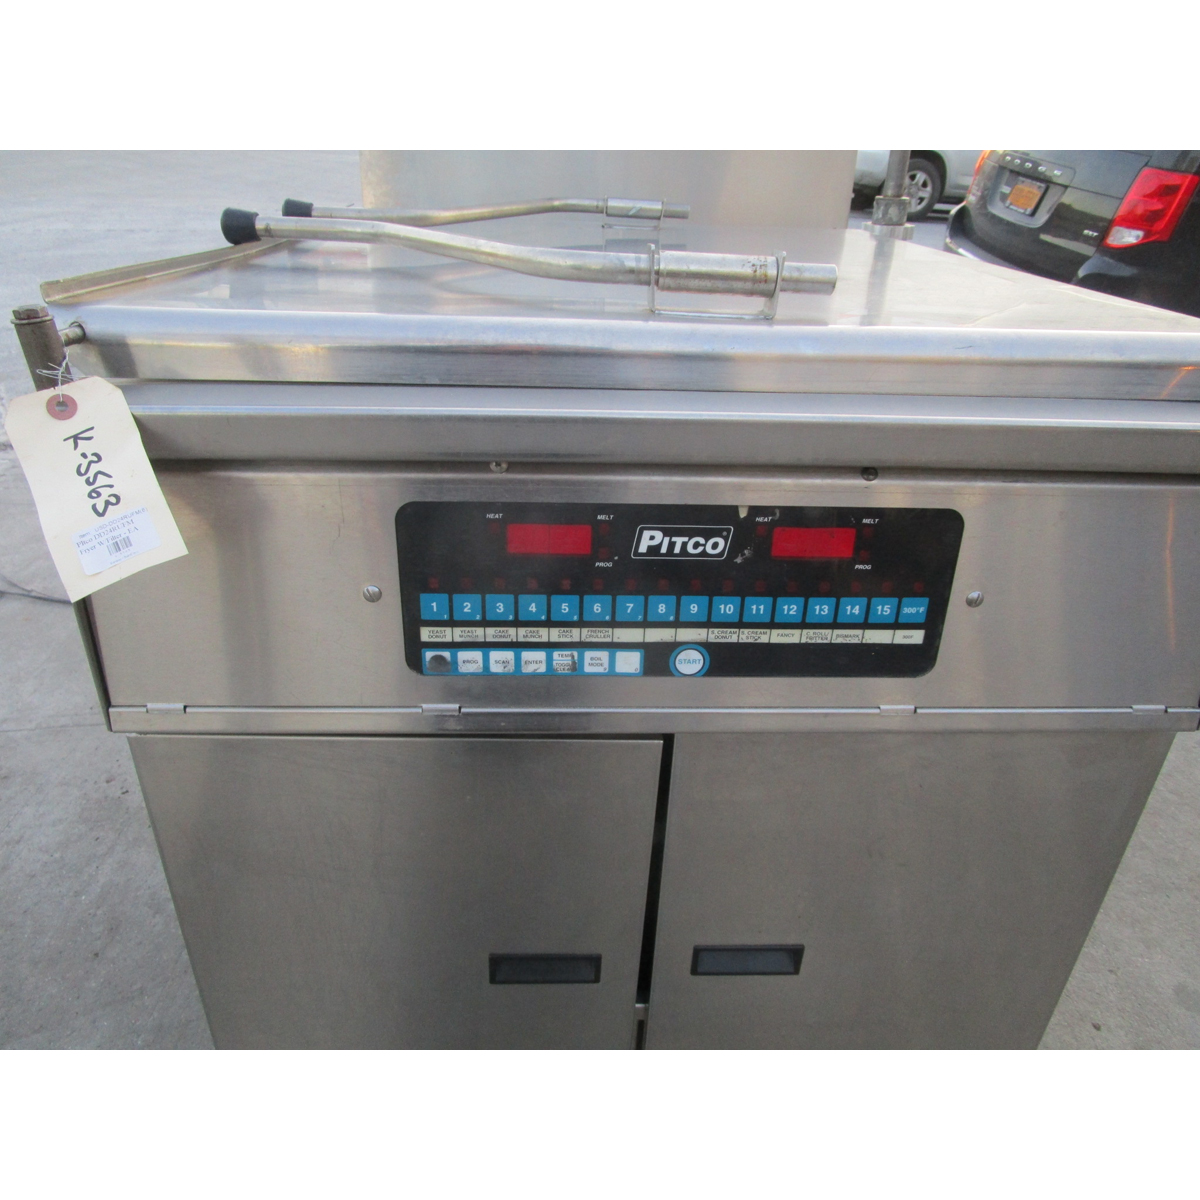 Pitco DD24RUFM Gas Donut Fryer with Filter, Very Good Condition image 2